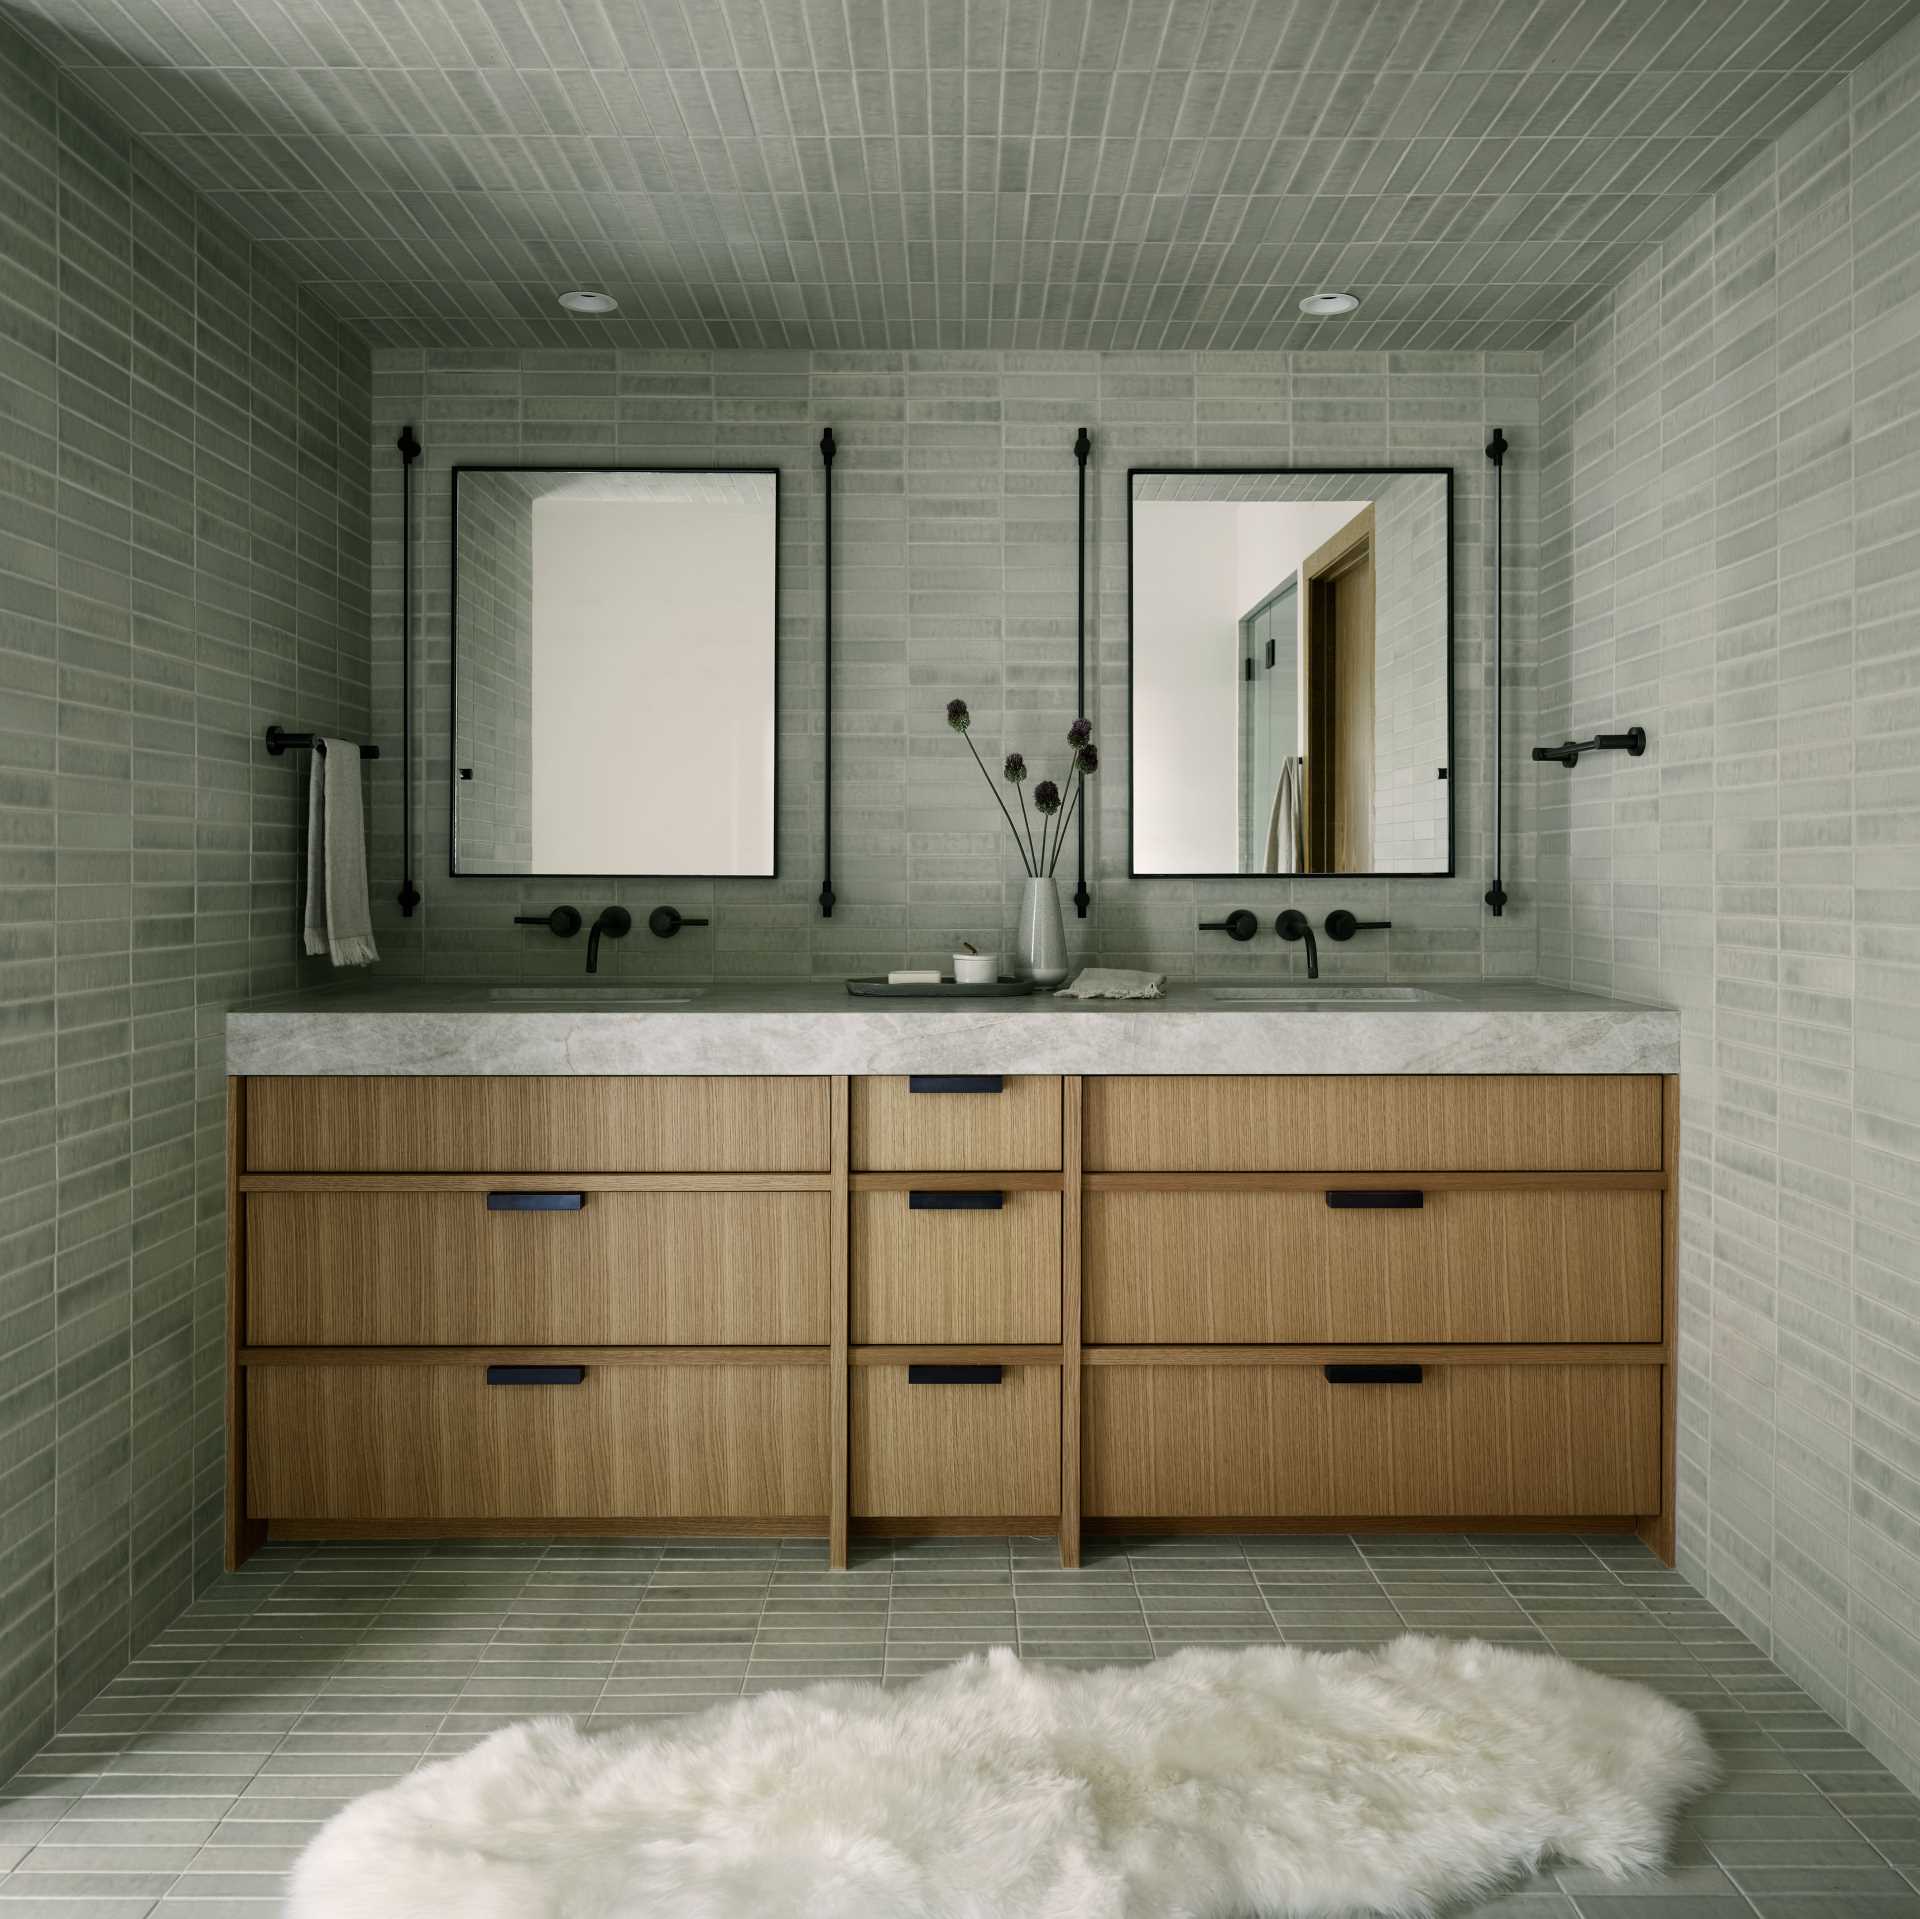 In the en-suite bathroom, tiles cover the walls, floor, and ceiling, while a double wood vanity adds a natural element to the ،e.